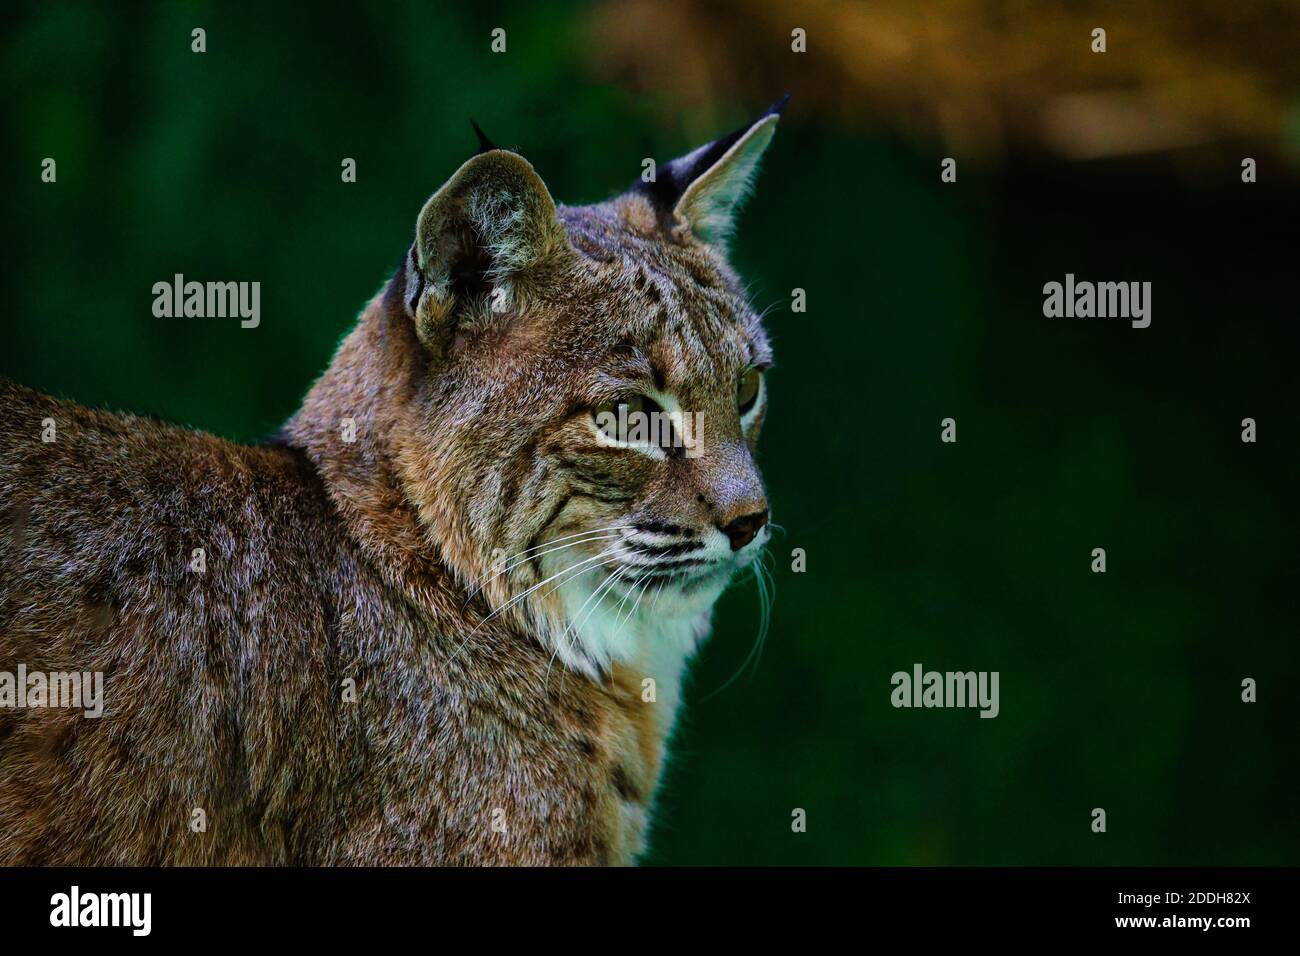 The intense stare of a Bobcat will make anyone stand up and take notice. Stock Photo